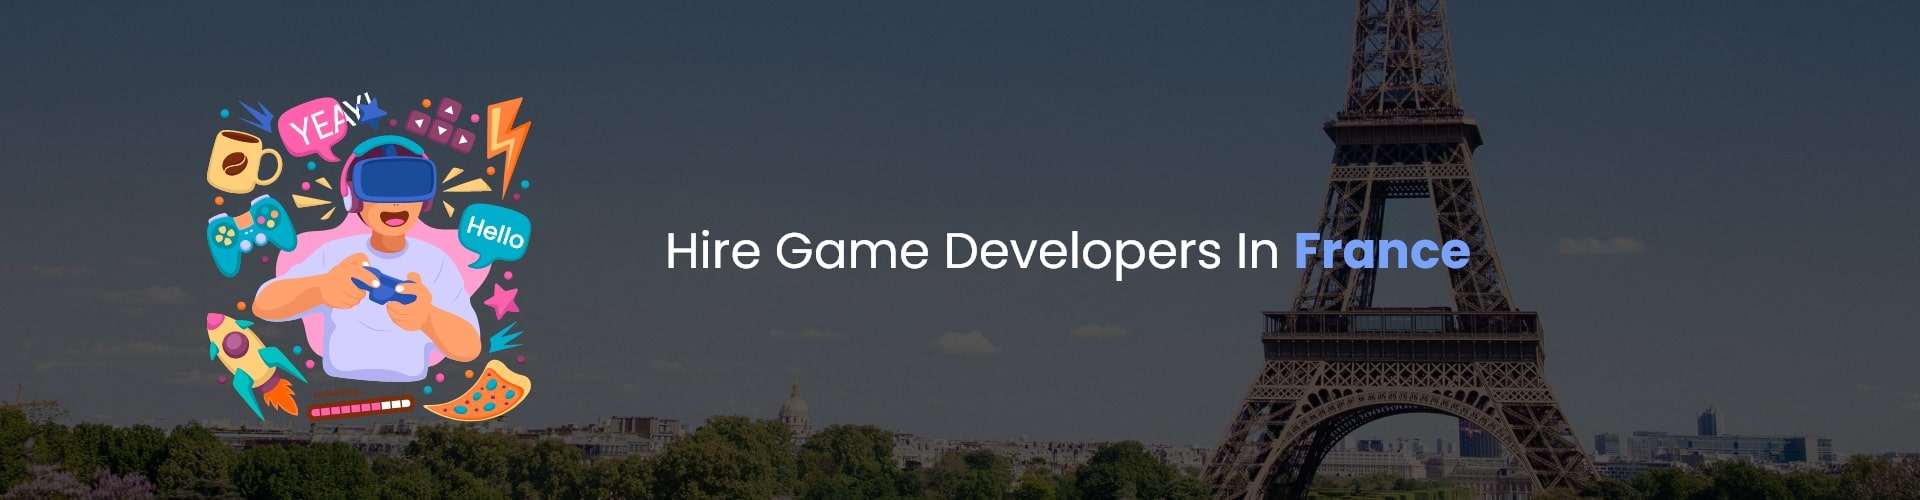 hire game developers in france